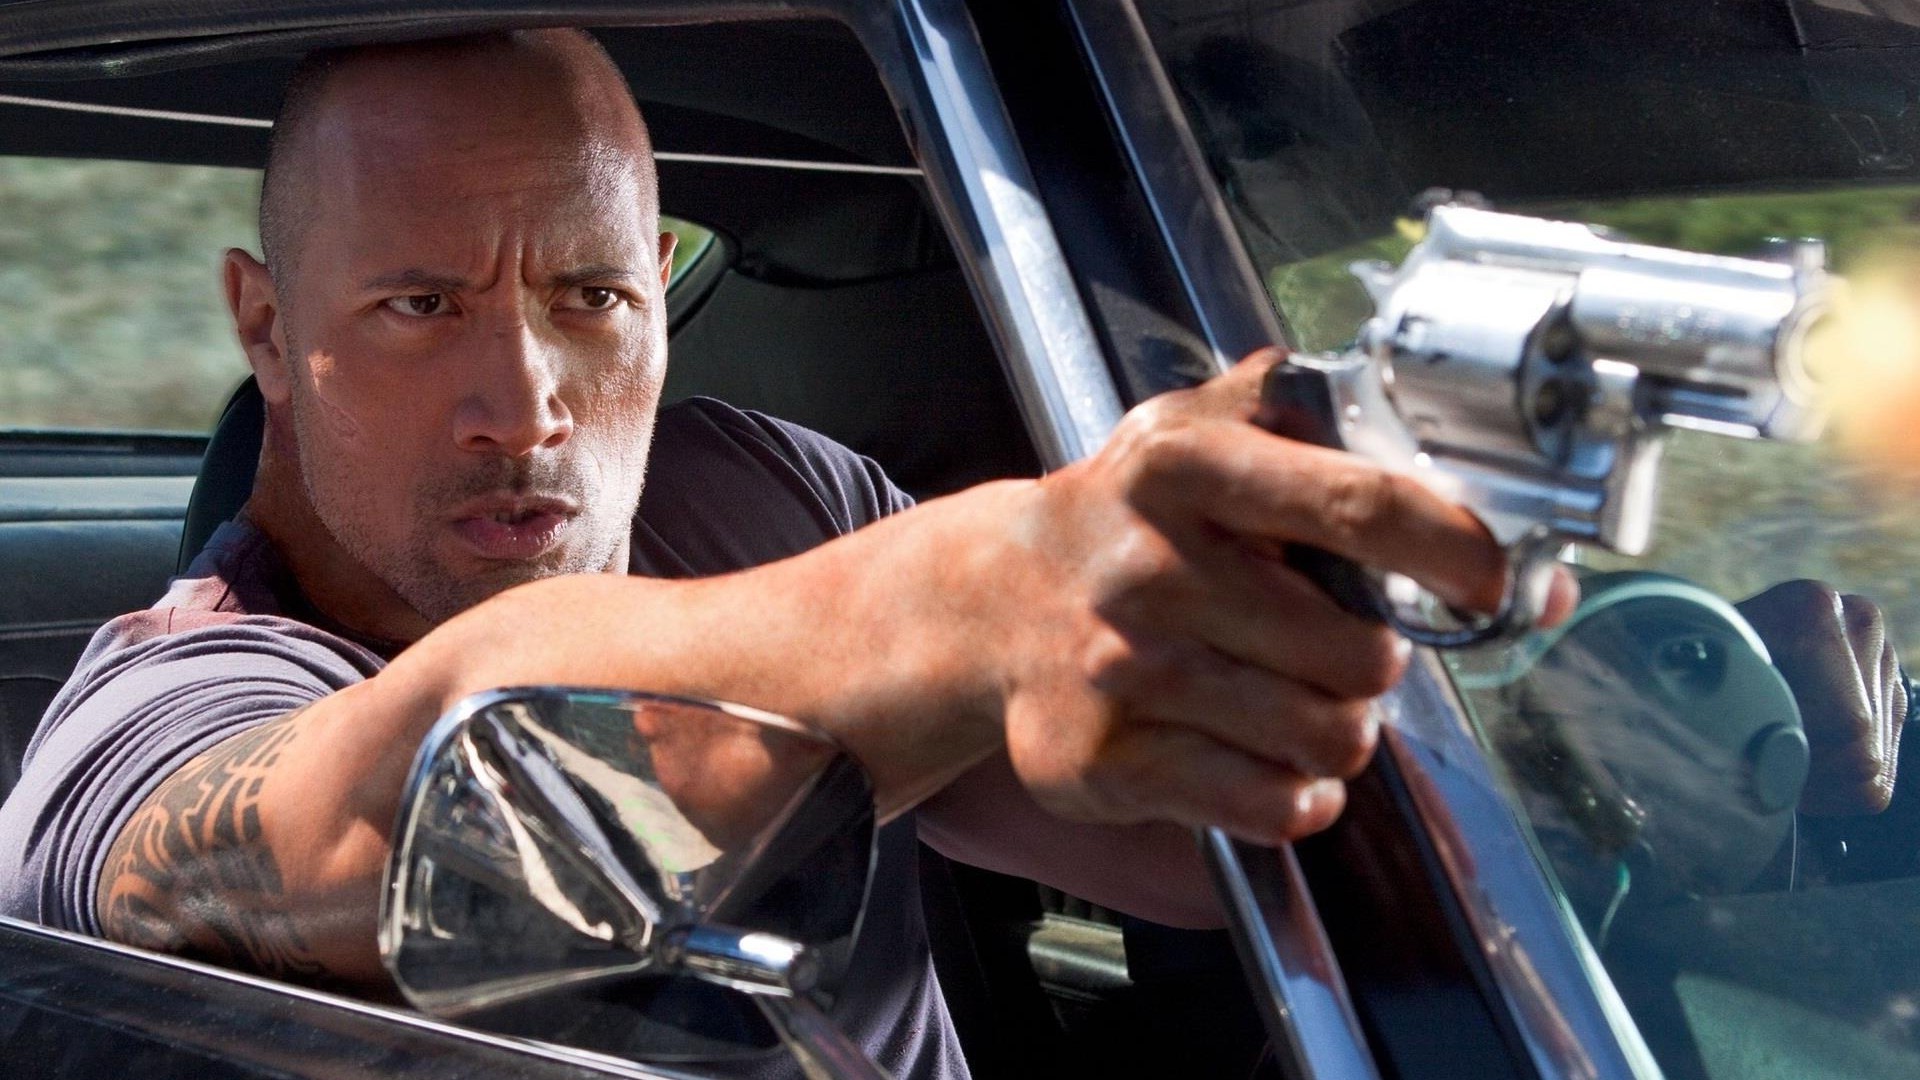 where can i download fast and furious 7 for free